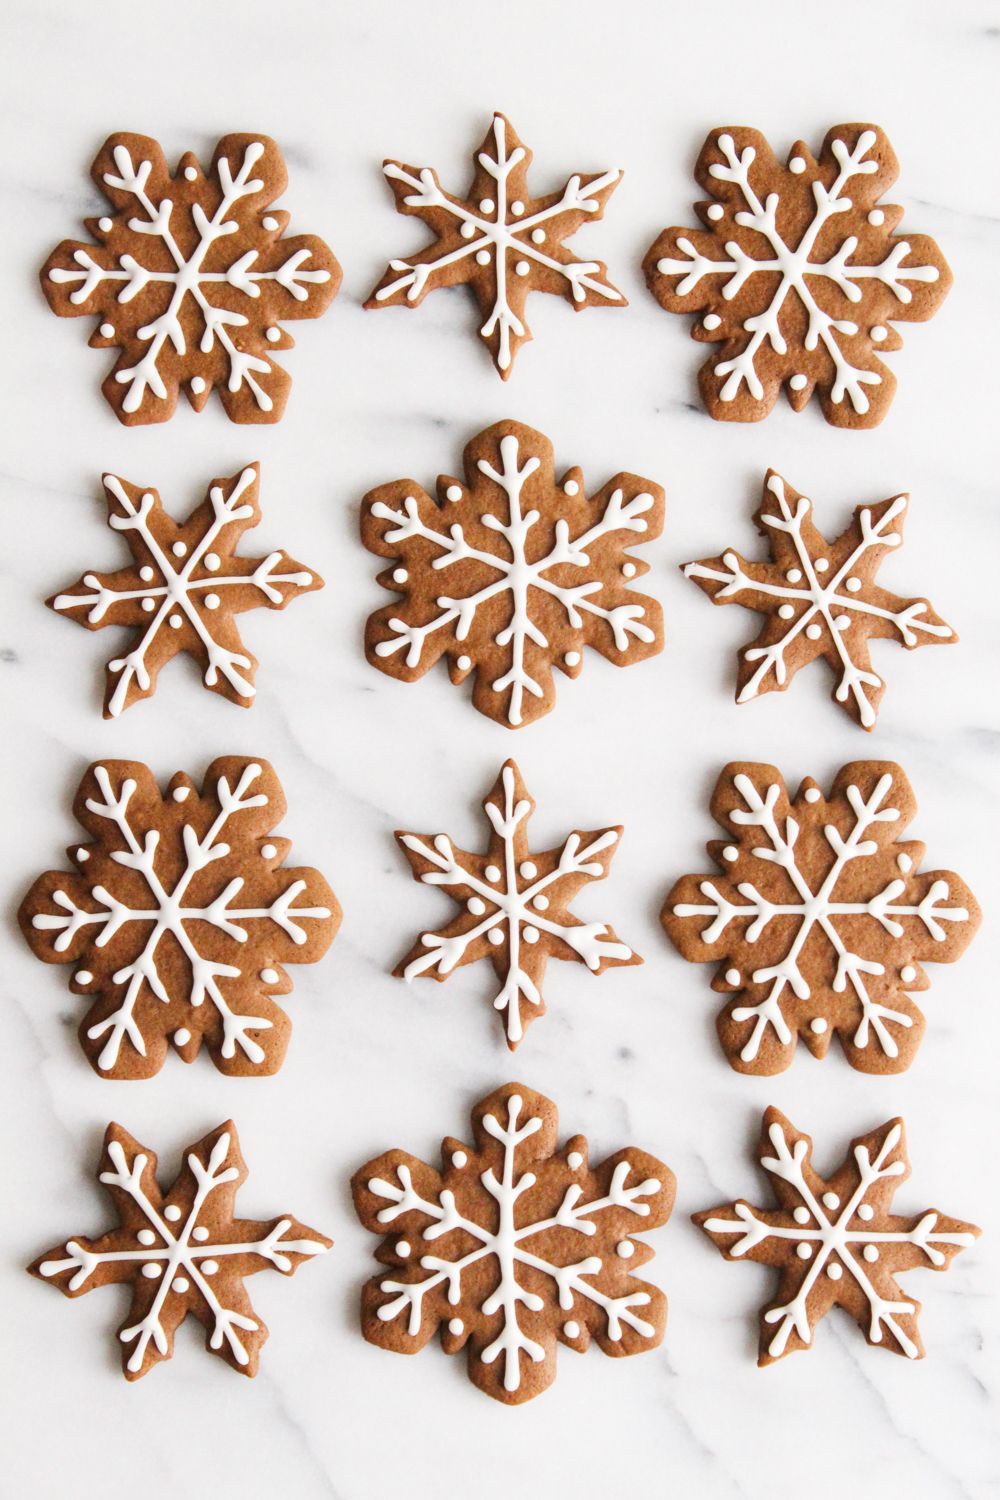 21 gingerbread cookies decorated christmas ideas